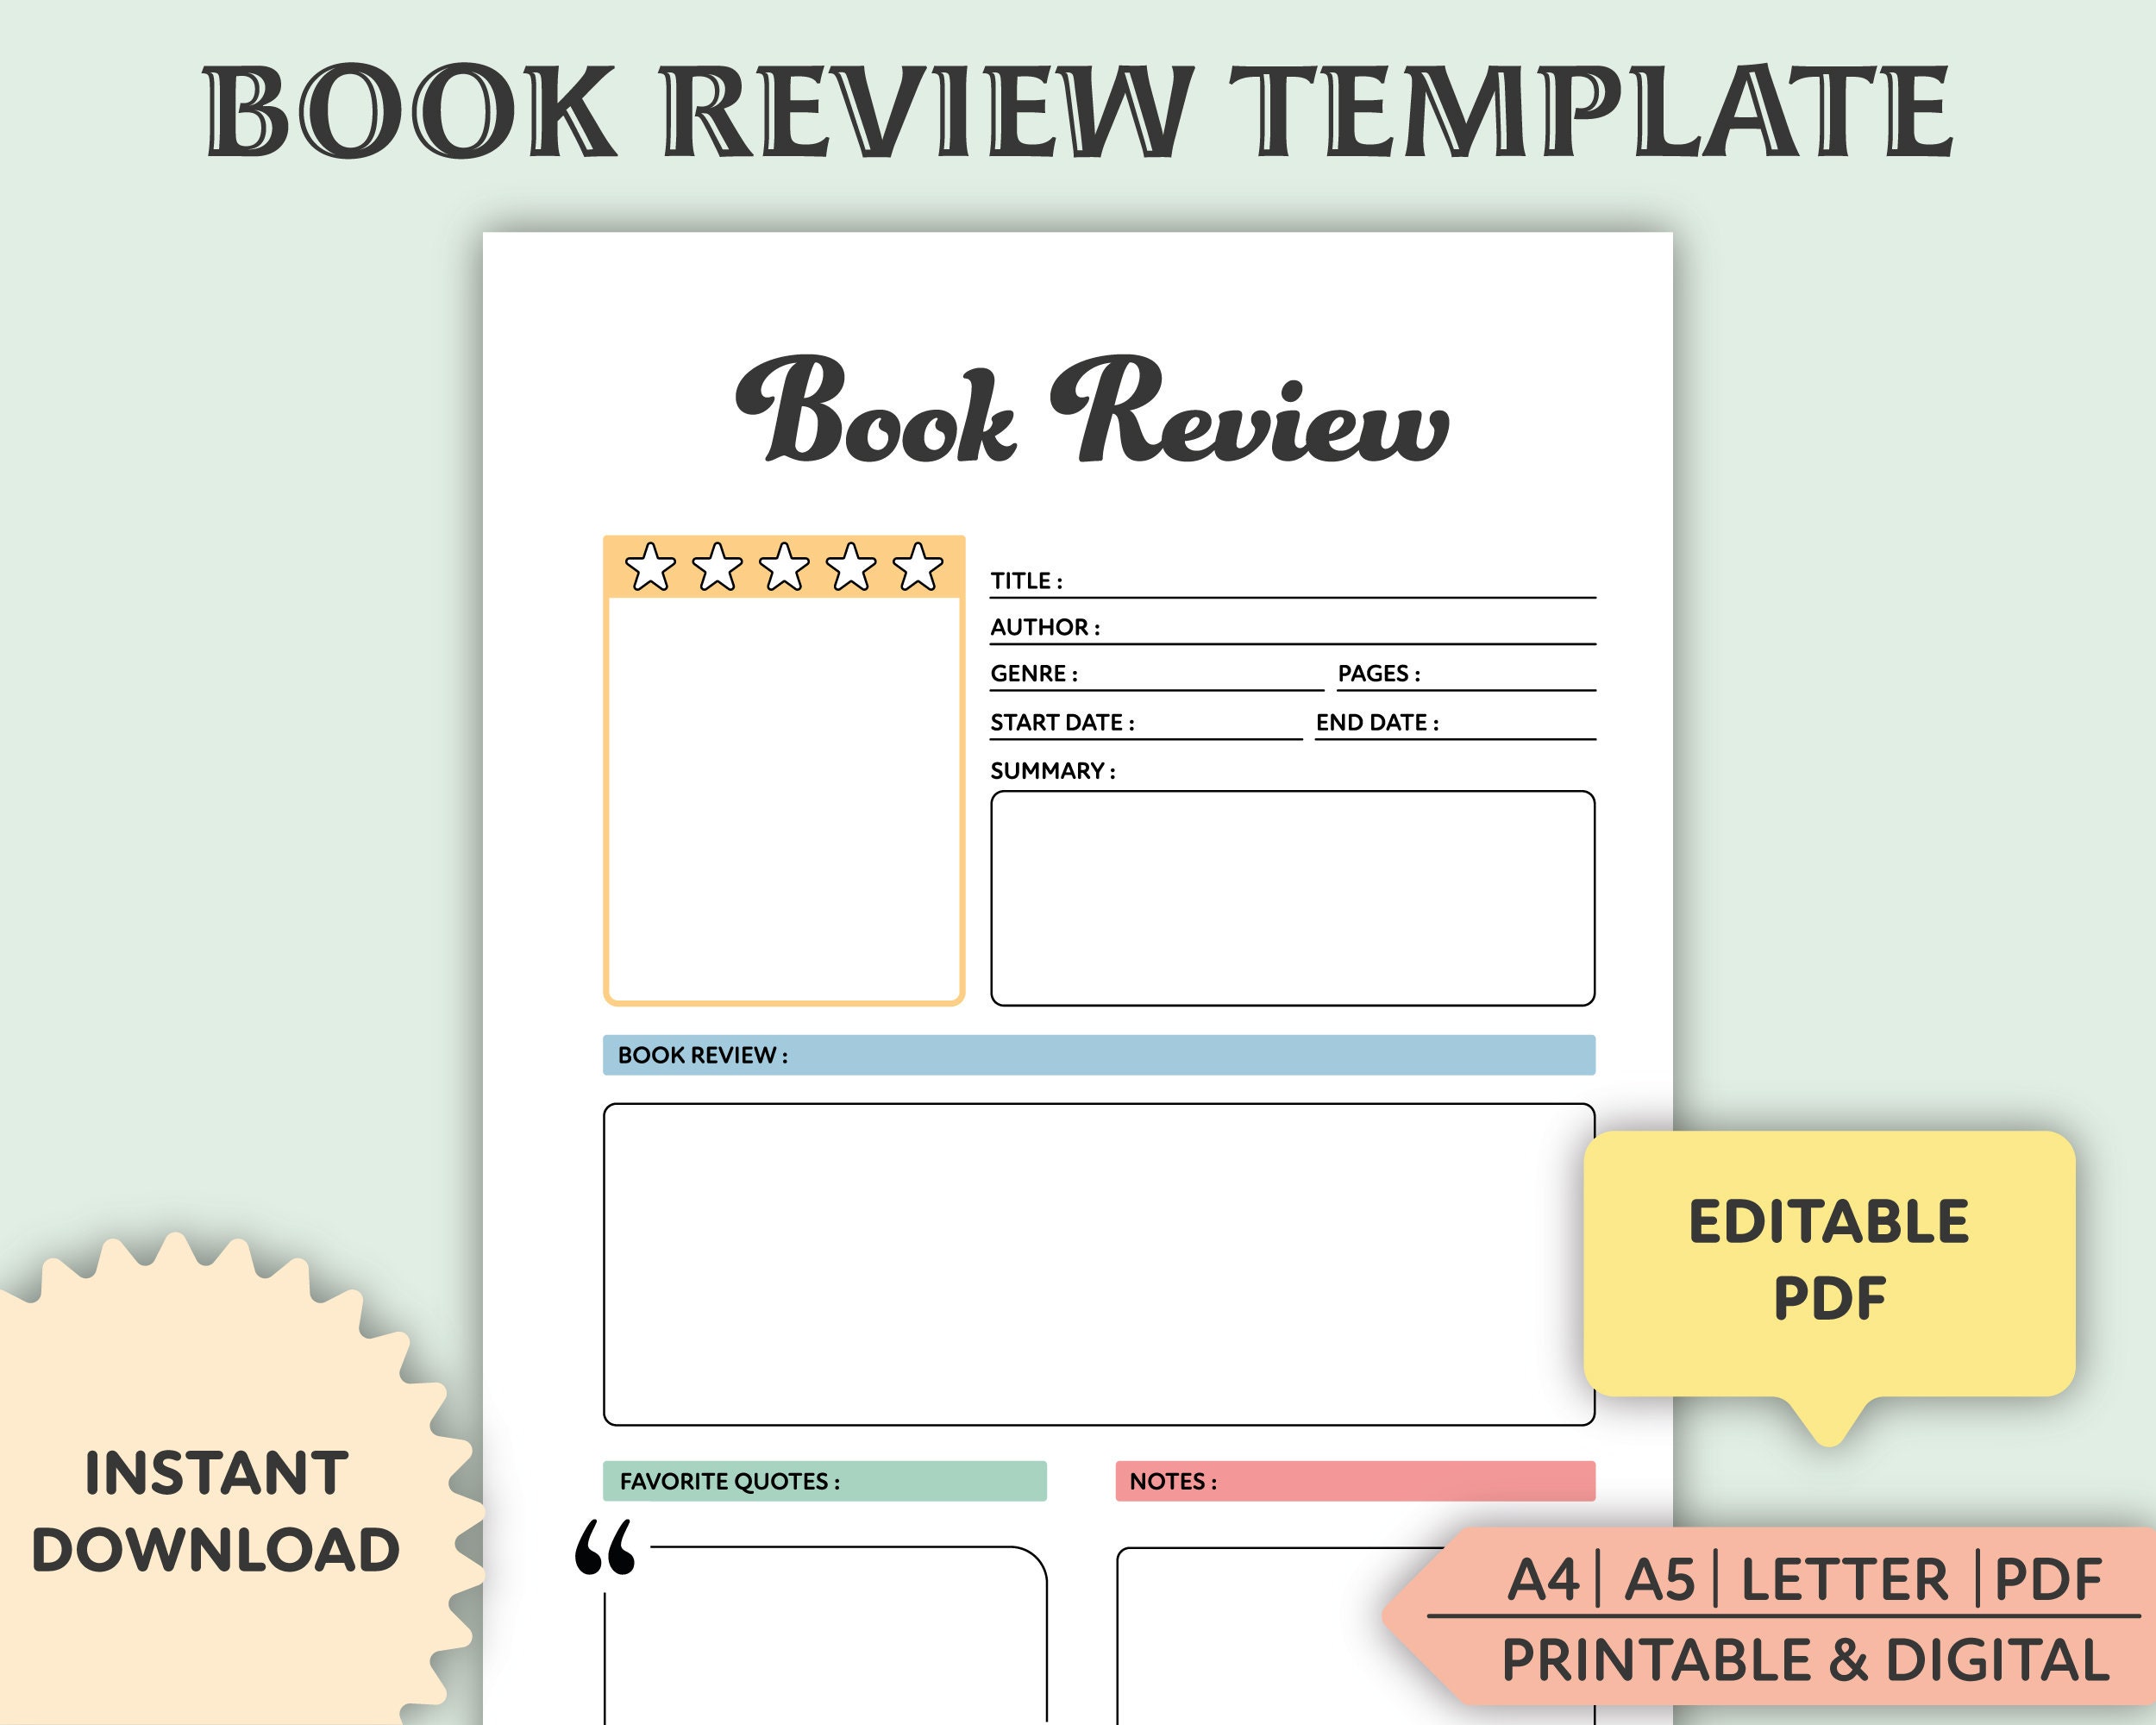 Book Review Printable, Instant Download PDF